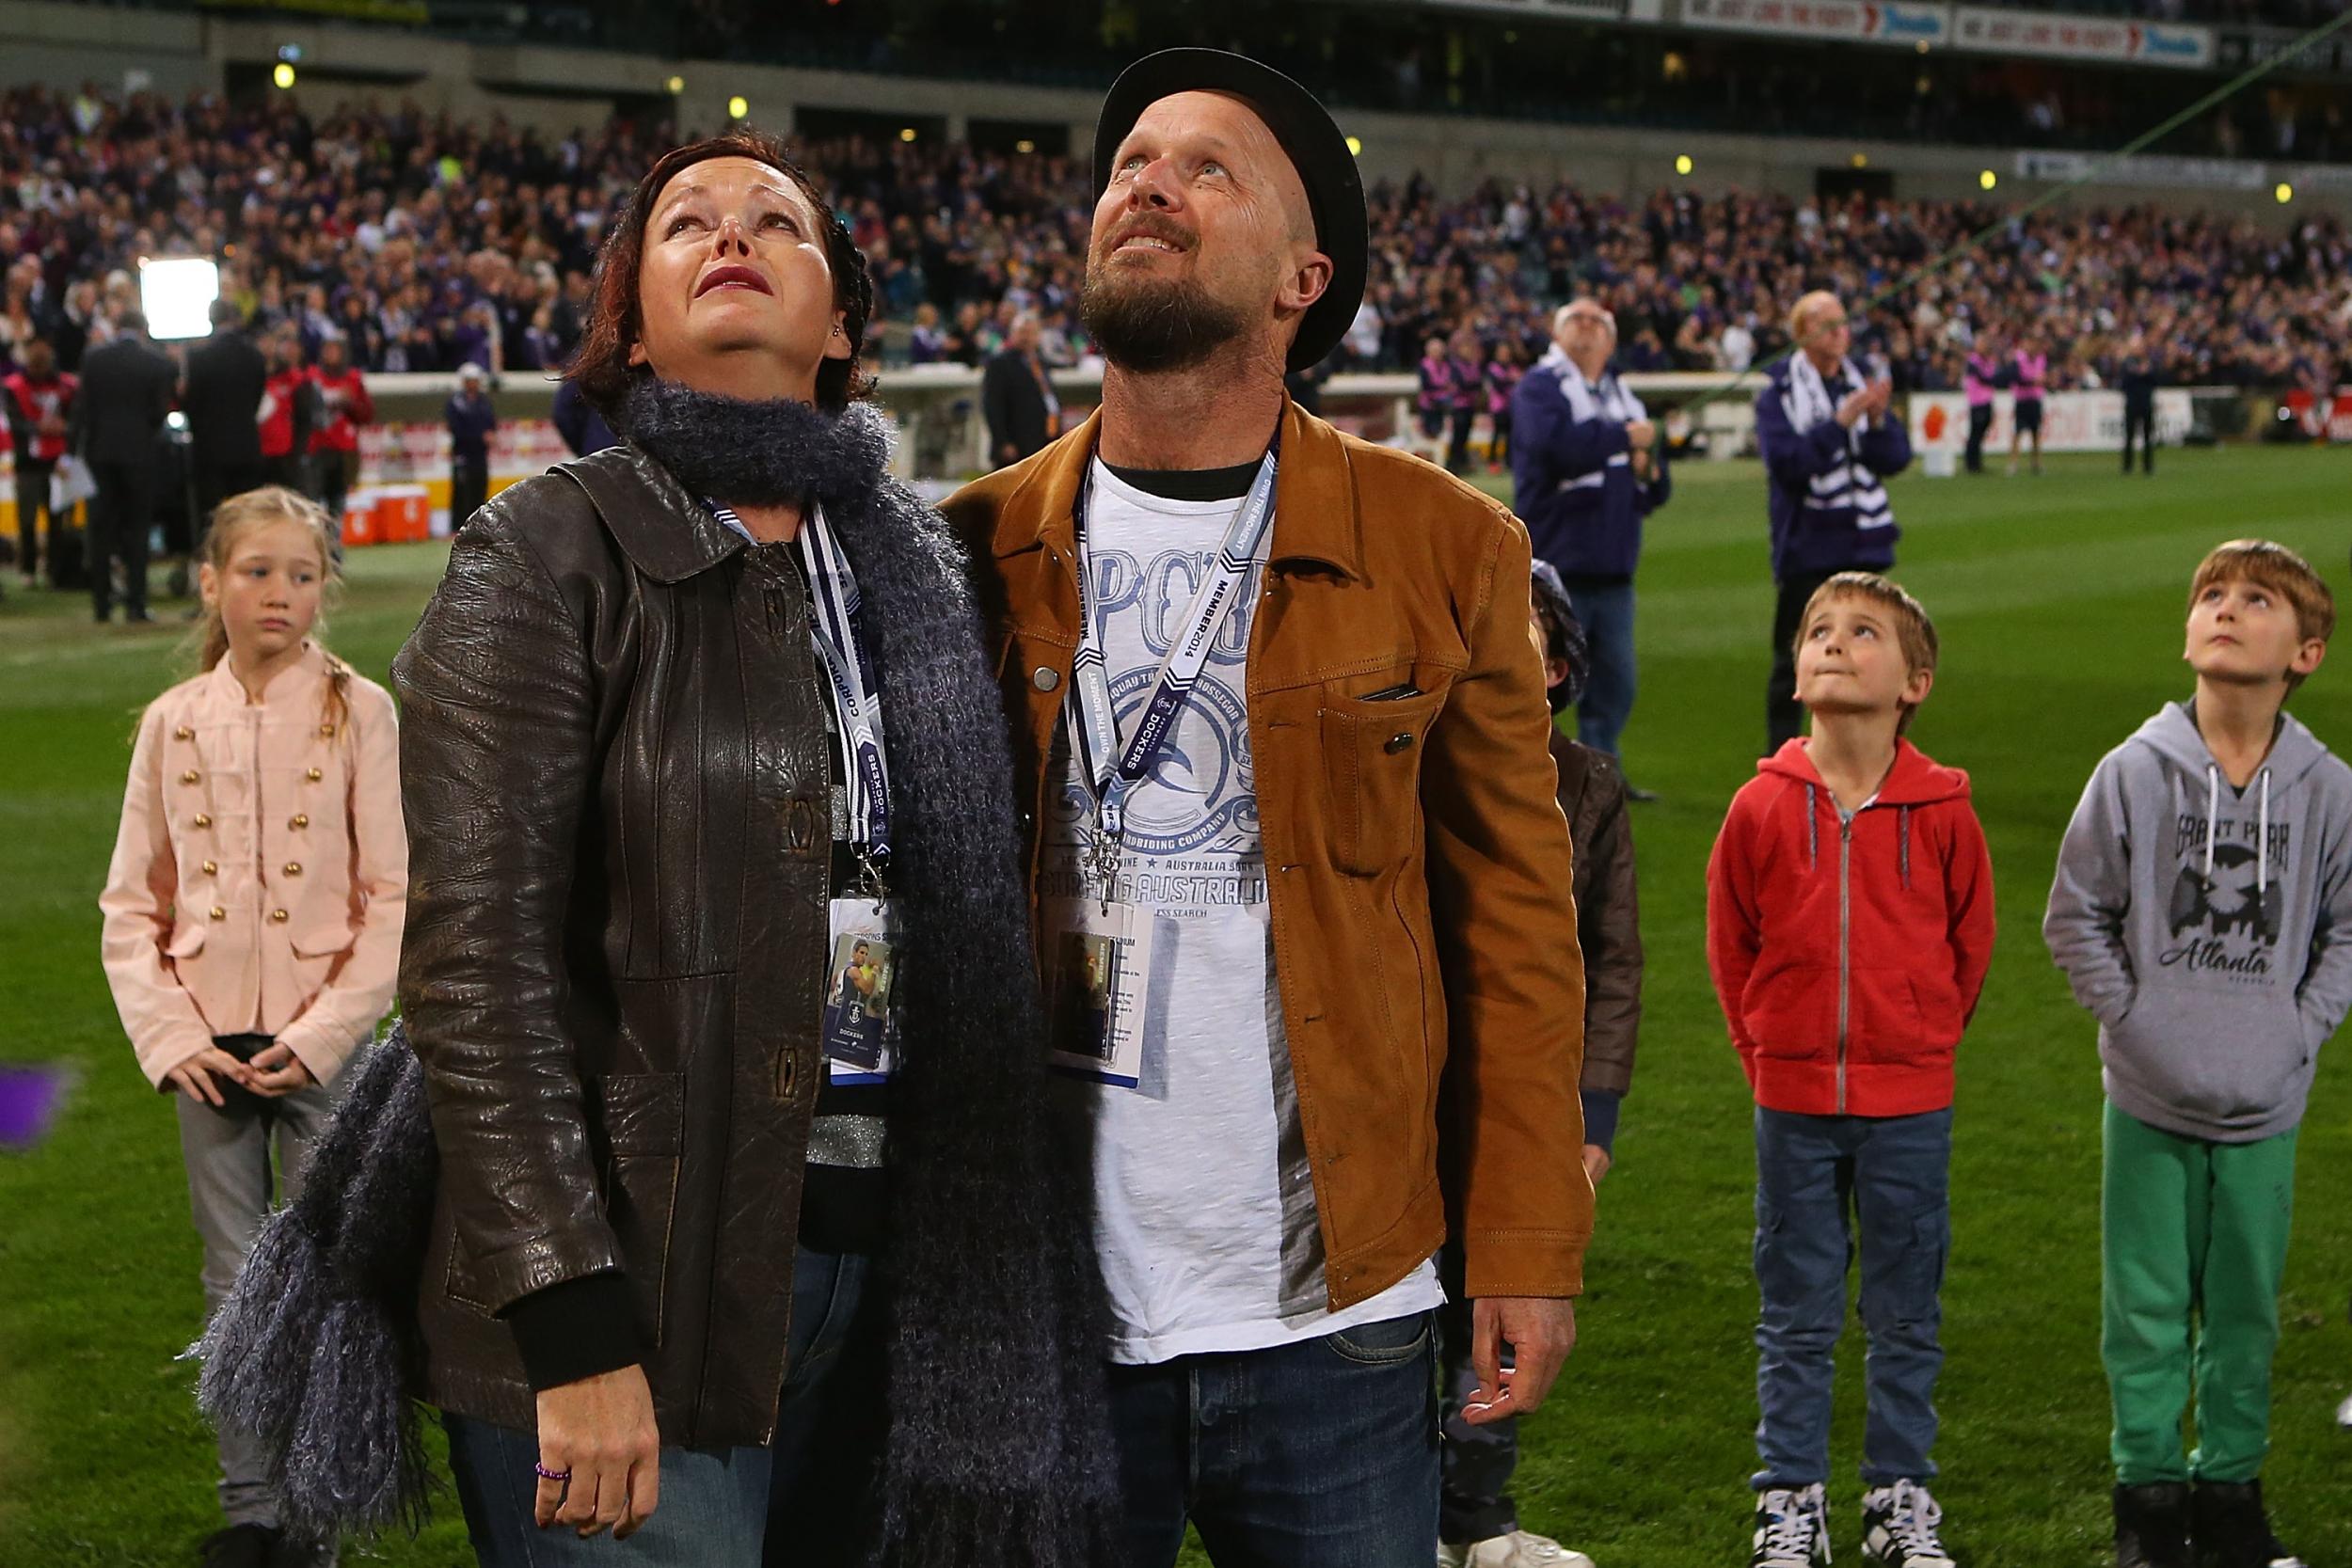 Rin Norris and Anthony Maslin look on after releasing balloons in tribute to their children at an Australian rules football match in Perth in July 2014